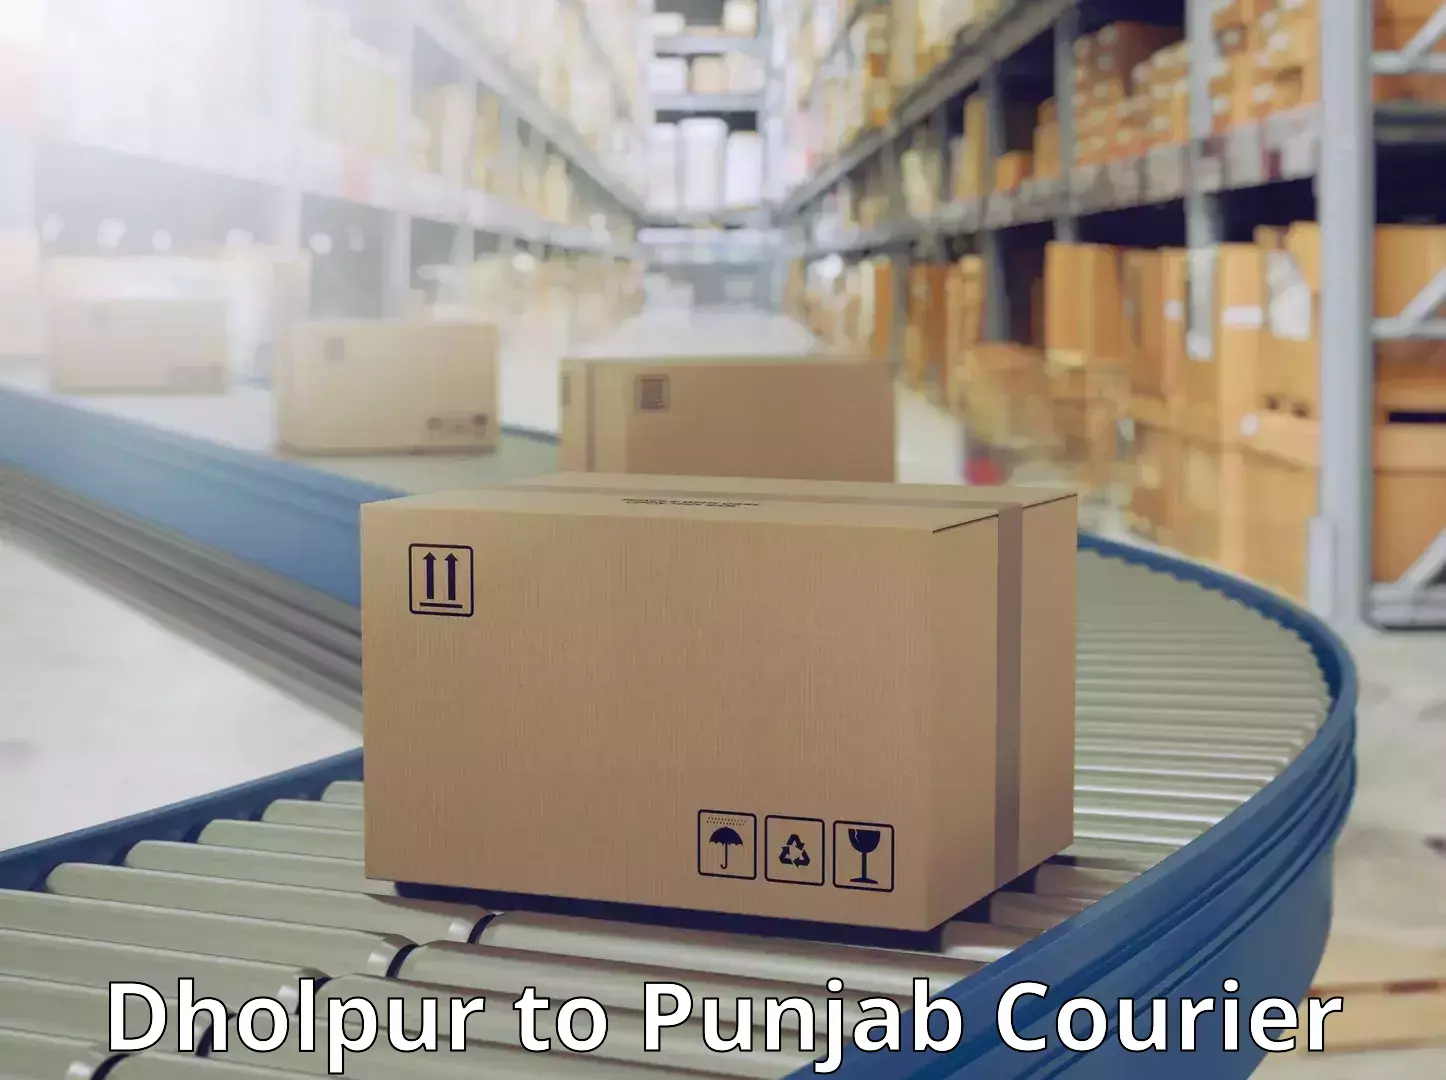 Reliable parcel services Dholpur to Talwandi Sabo